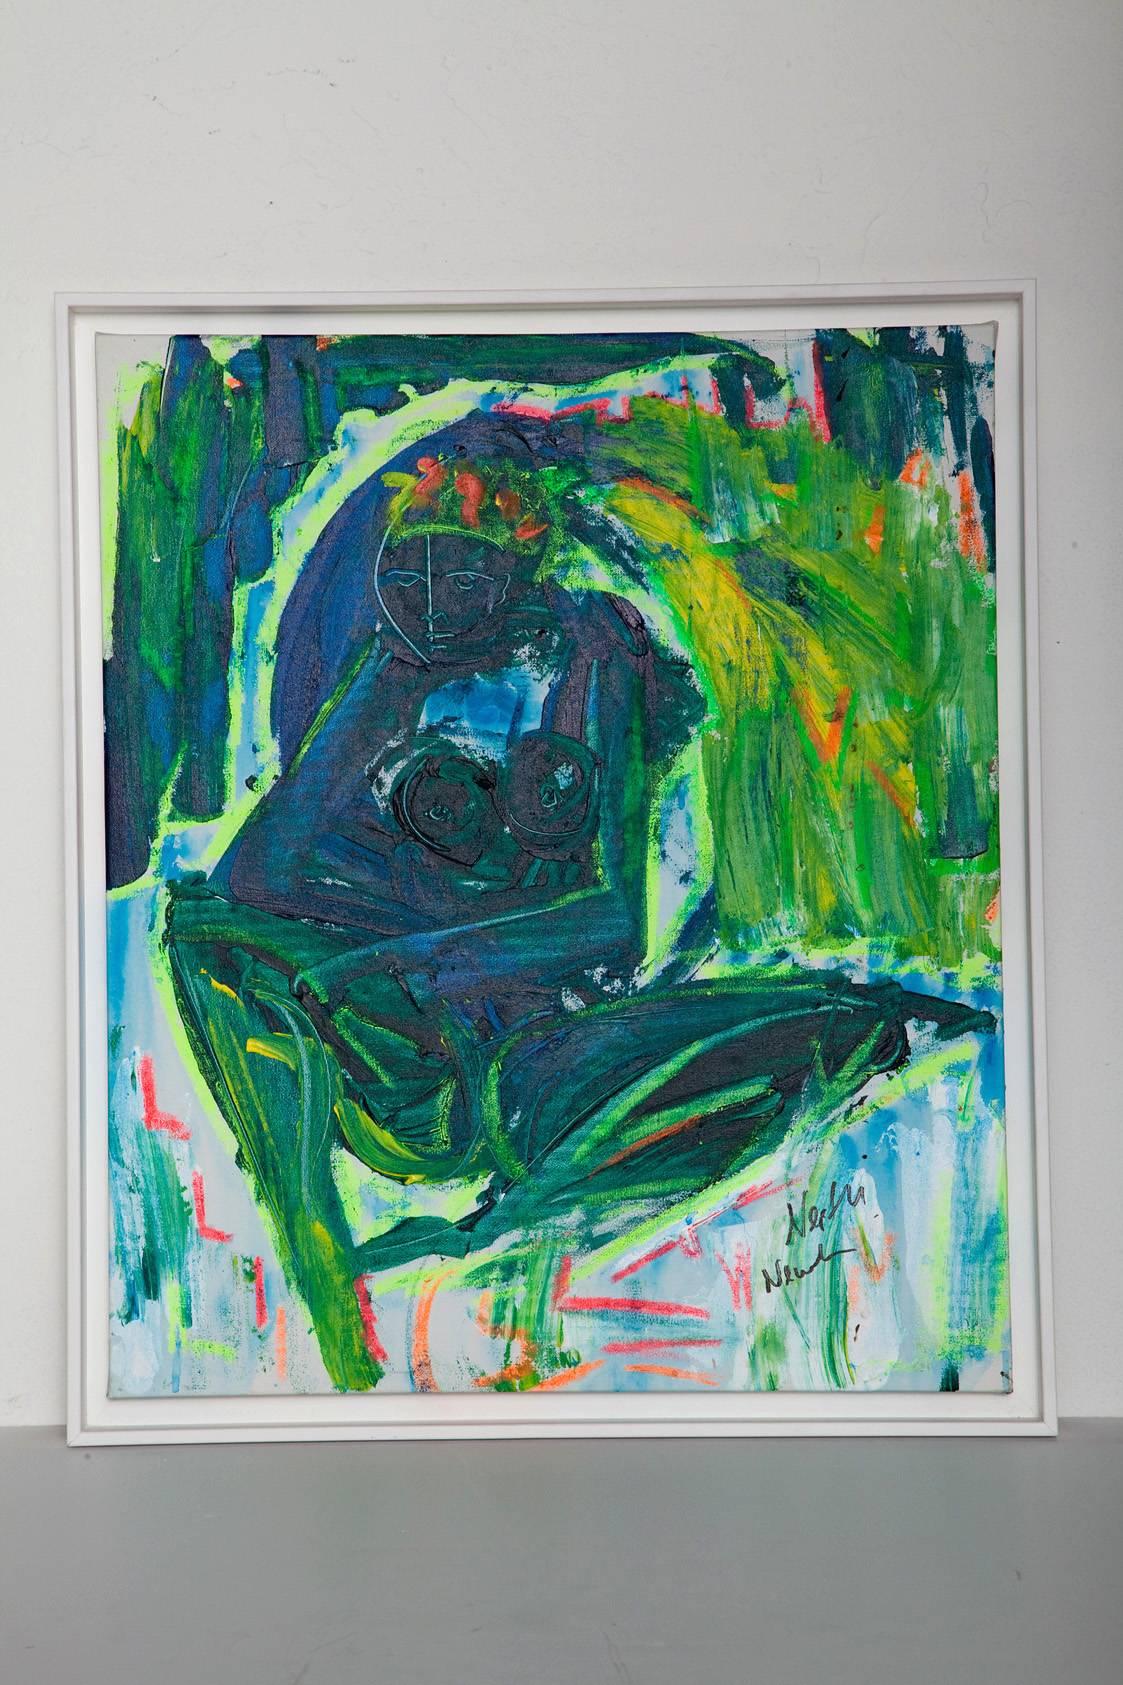 Acrylic on canvas, original painting by Neith Nevelson (1946-), granddaughter of Louise Nevelson. Abstract nude rendered in intensely vibrant and rich colors. Signed in marker, lower right.